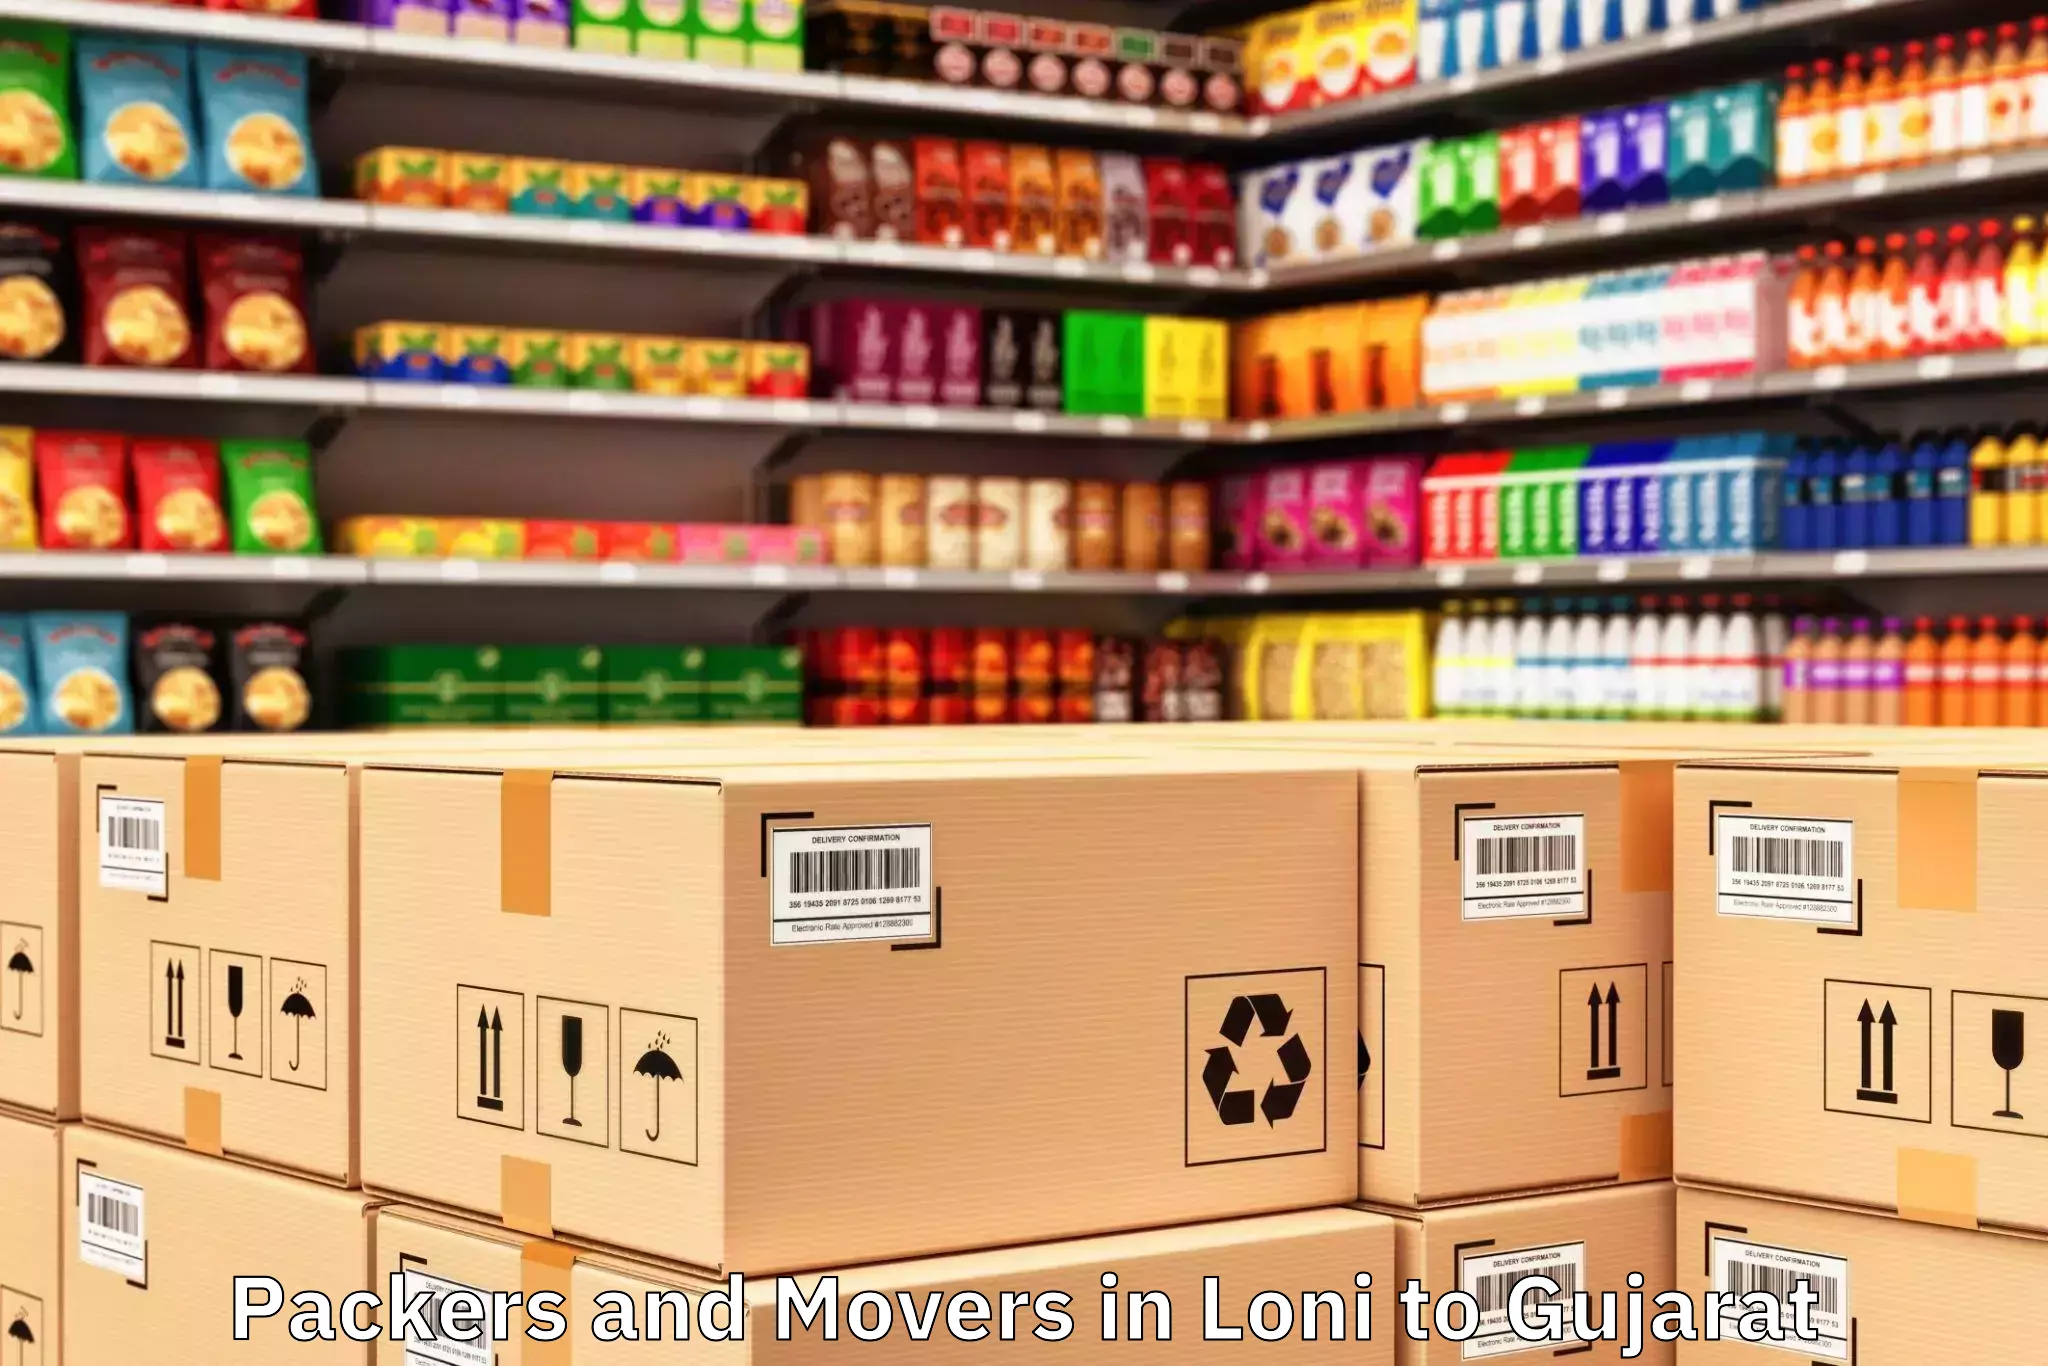 Loni to Amirgadh Packers And Movers Booking